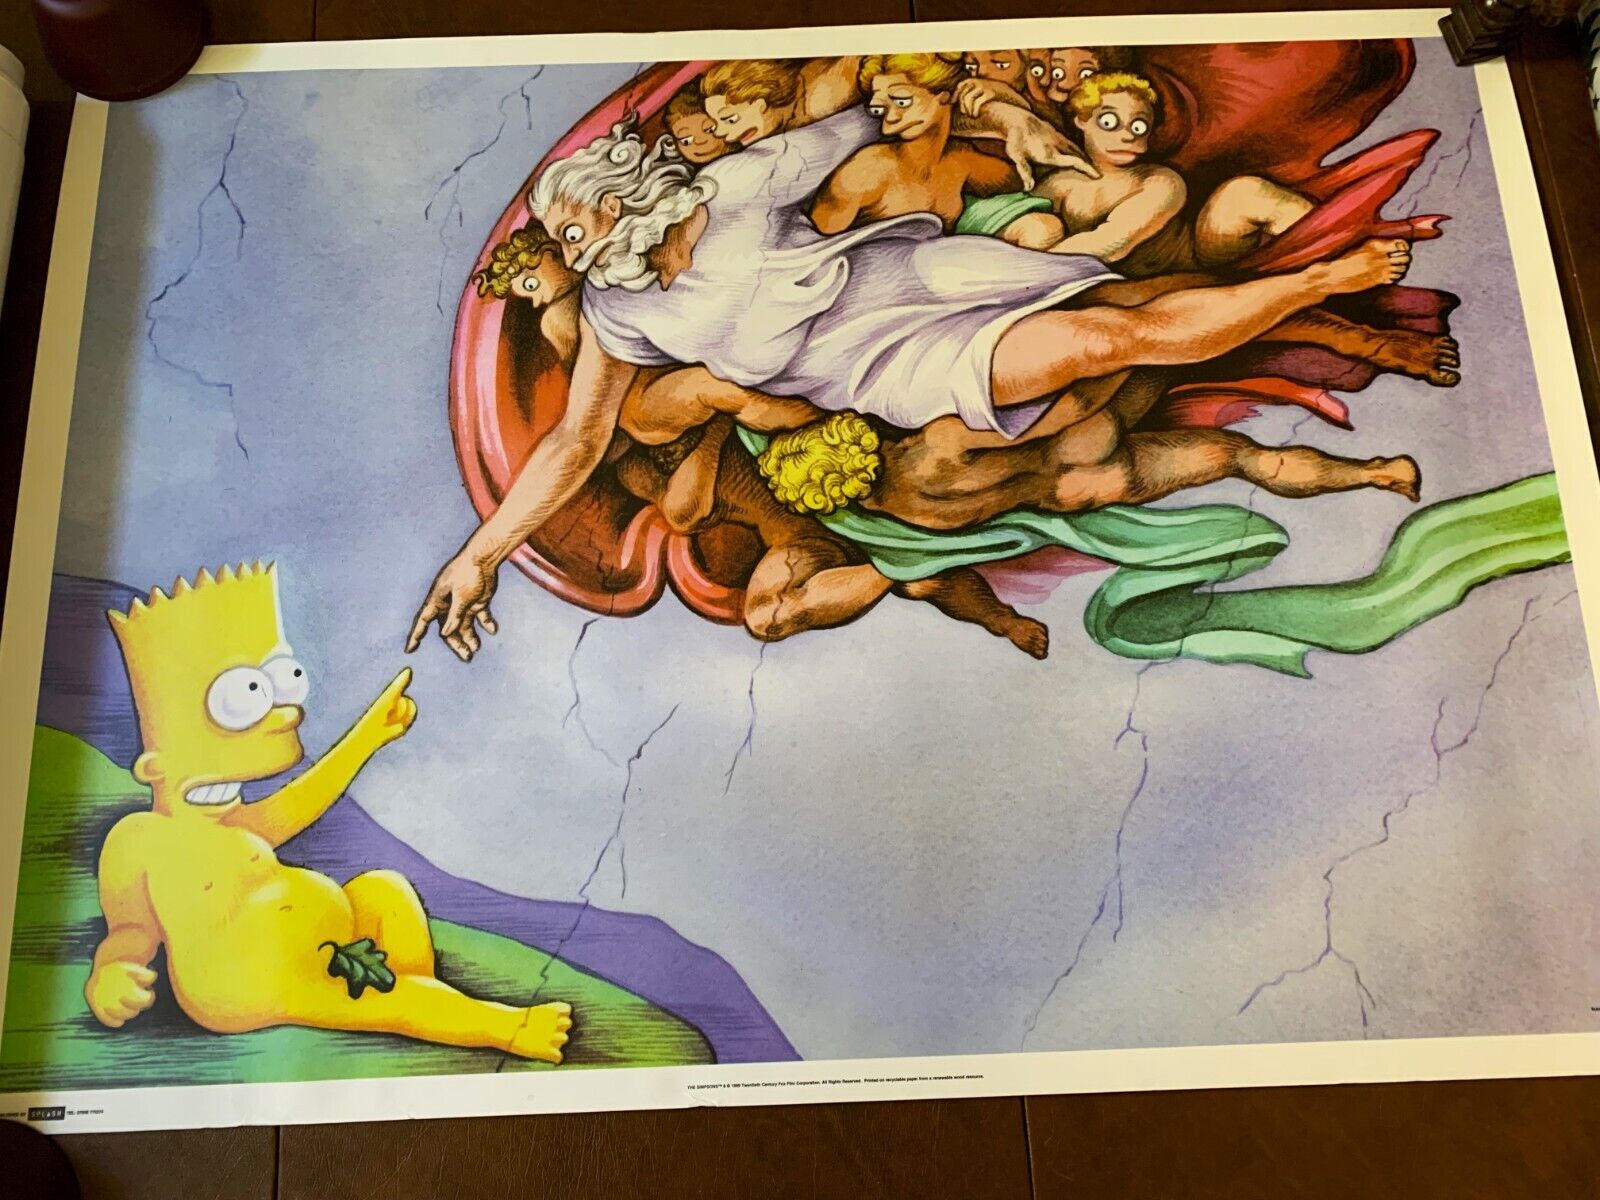 RARE UNUSED Simpsons CREATION Poster Never Hung 25x35 VINTAGE Michelangelo